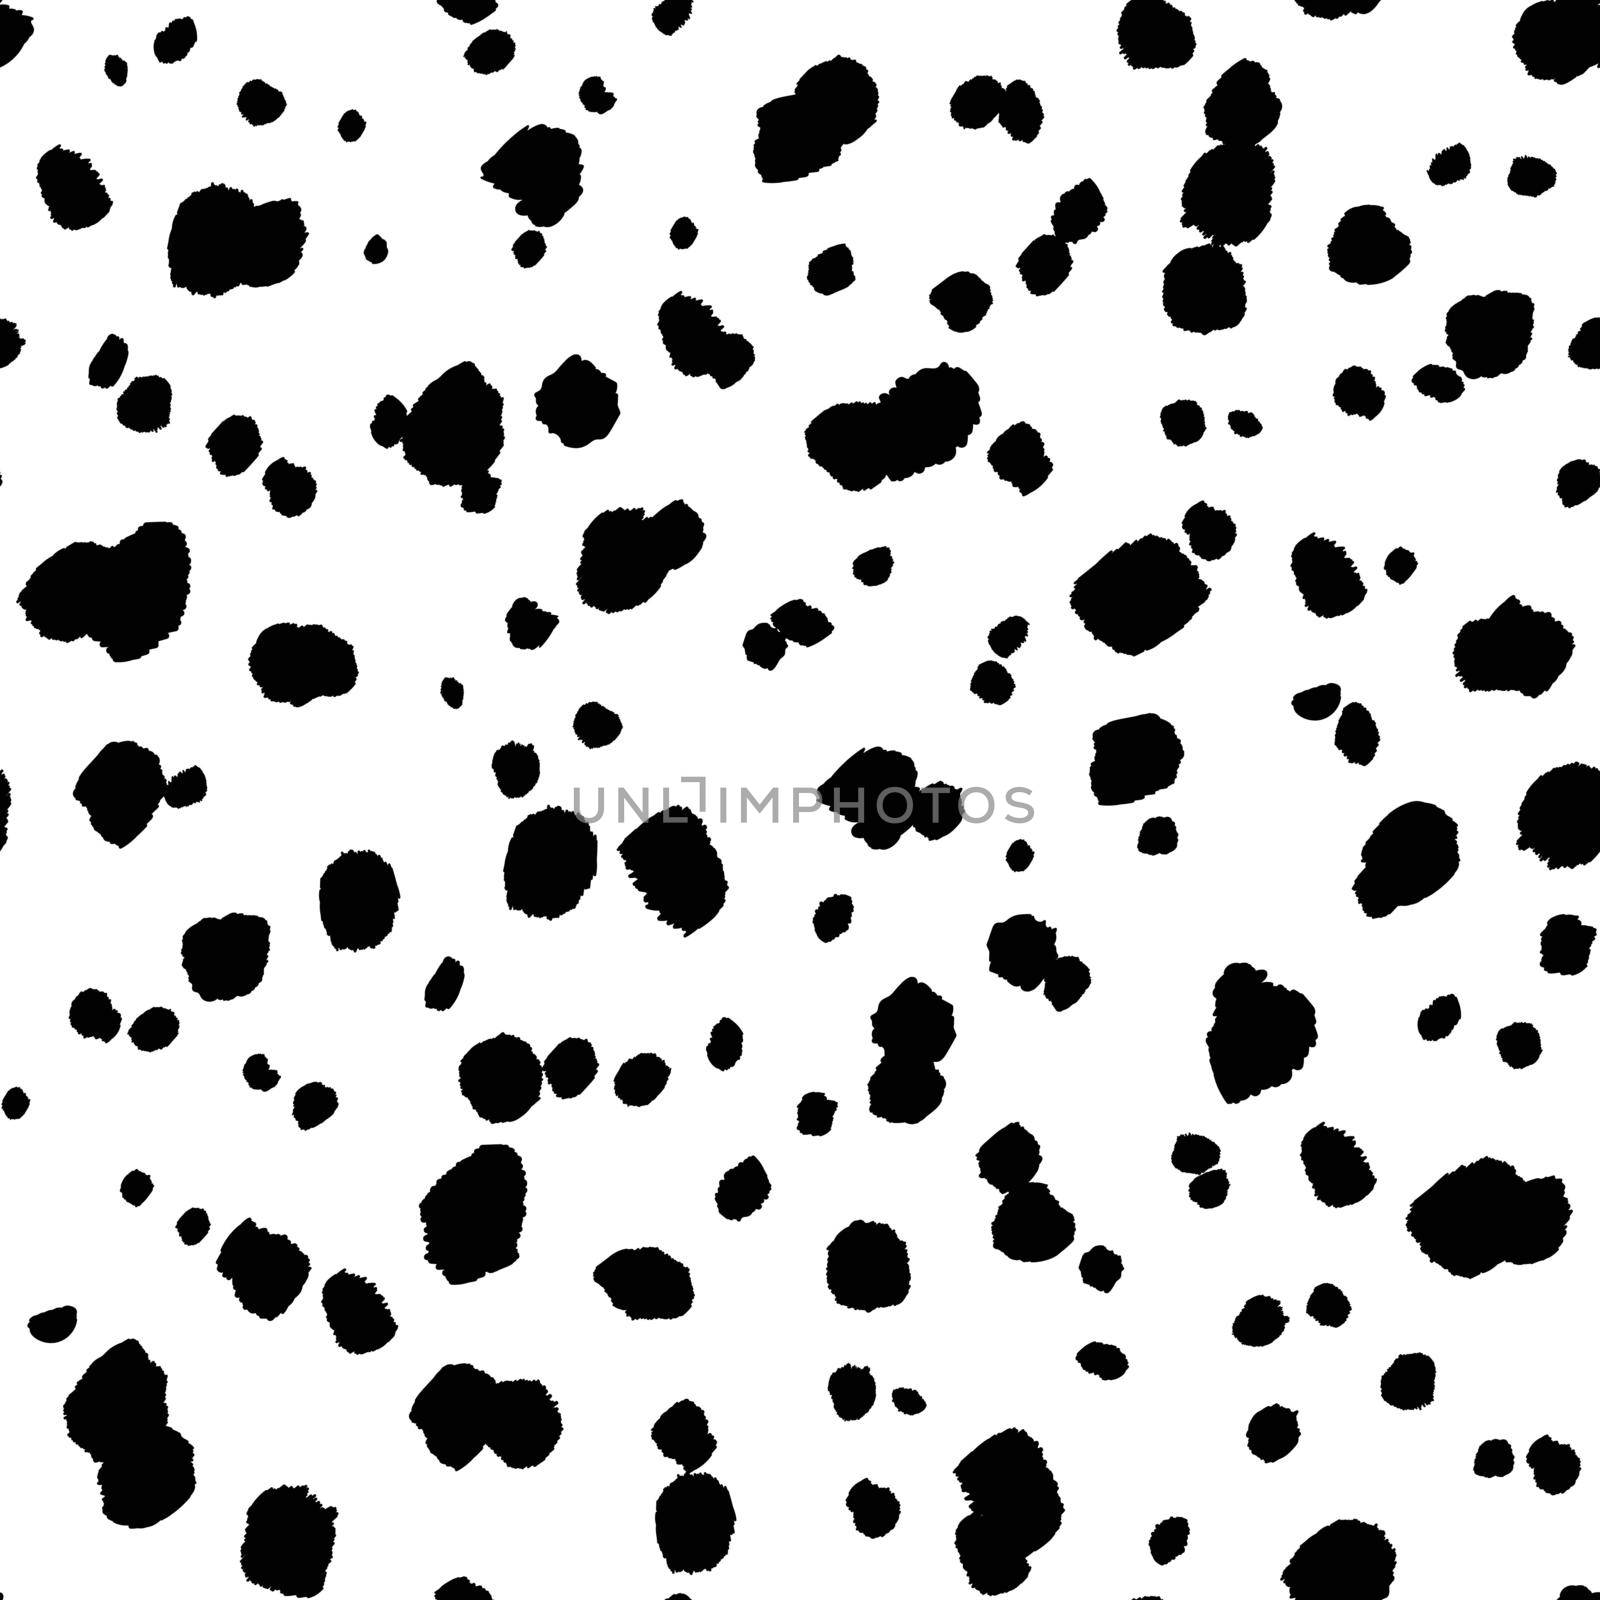 Abstract modern dalmatian seamless pattern. Animals trendy background. Black and white decorative vector illustration for print, card, postcard, fabric, textile. Modern ornament of stylized skin.